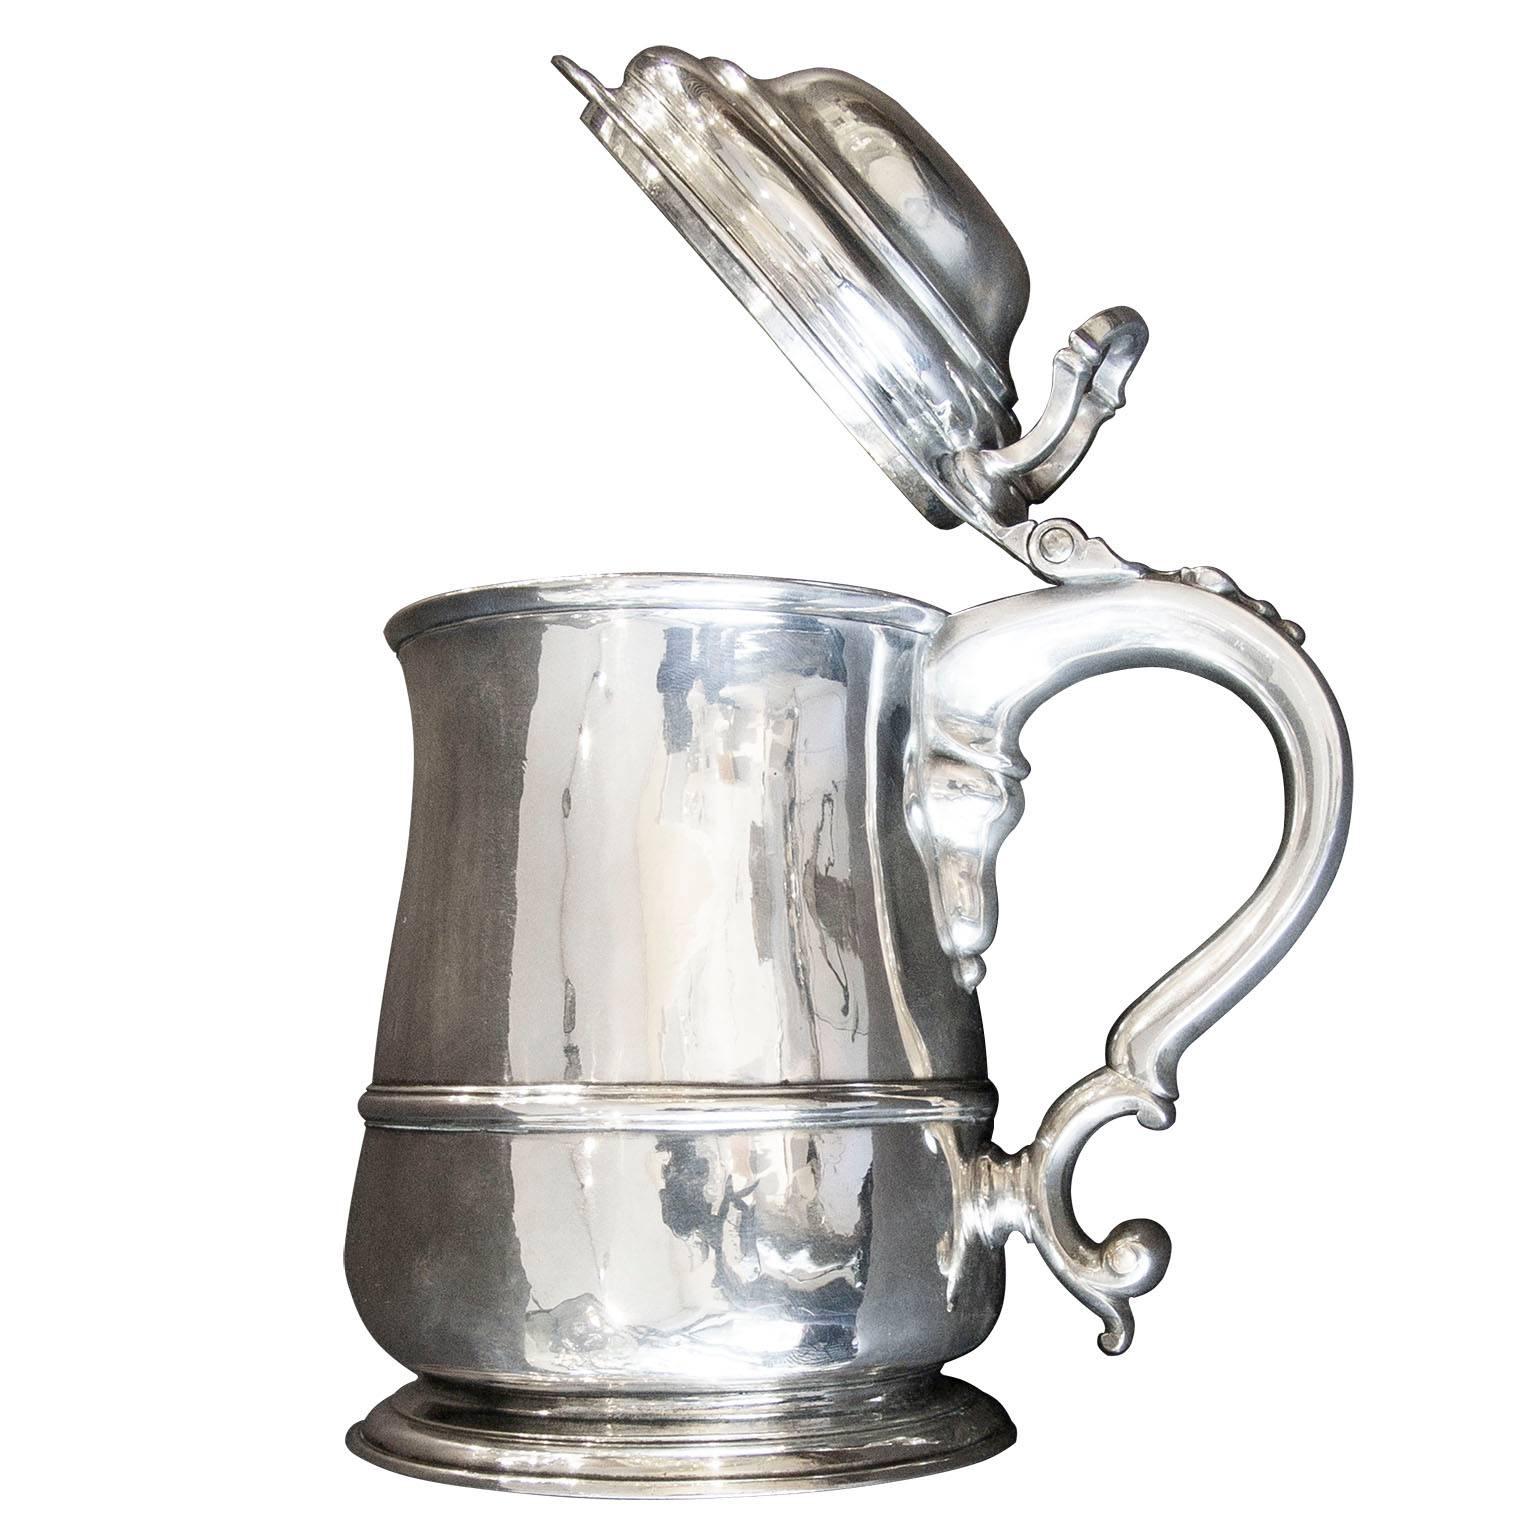 A fine quality sterling silver George II covered / lidded belly quart tankard. London made.

A heavier than usual antique George II sterling silver lidded tankard. This silver Georgian (George II) quart tankard has an impressive domed hinged lid